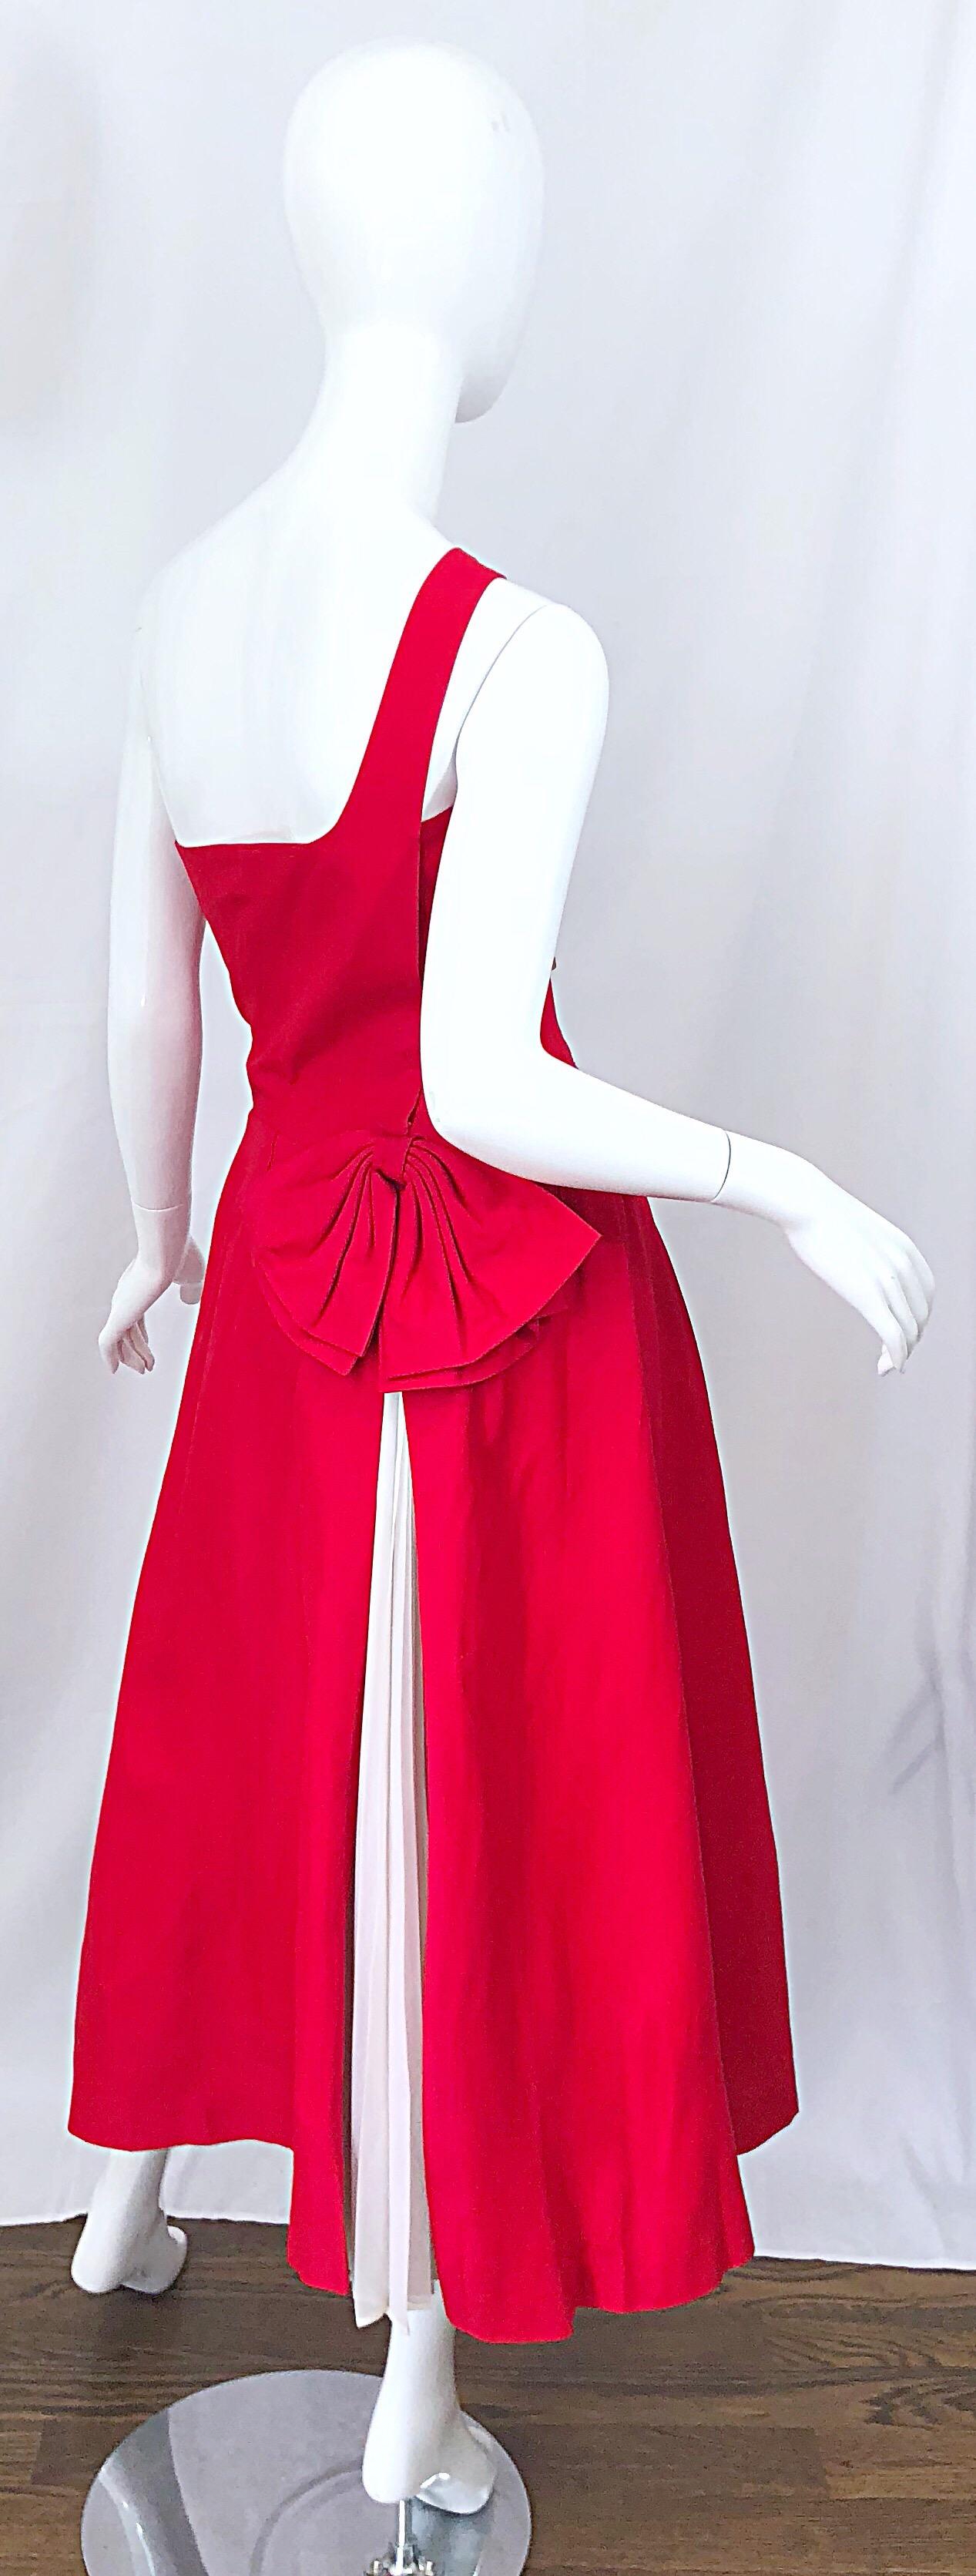 1950s Bess Myerson Lipstick Red + White One Shoulder Vintage 50s Silk Dress For Sale 3